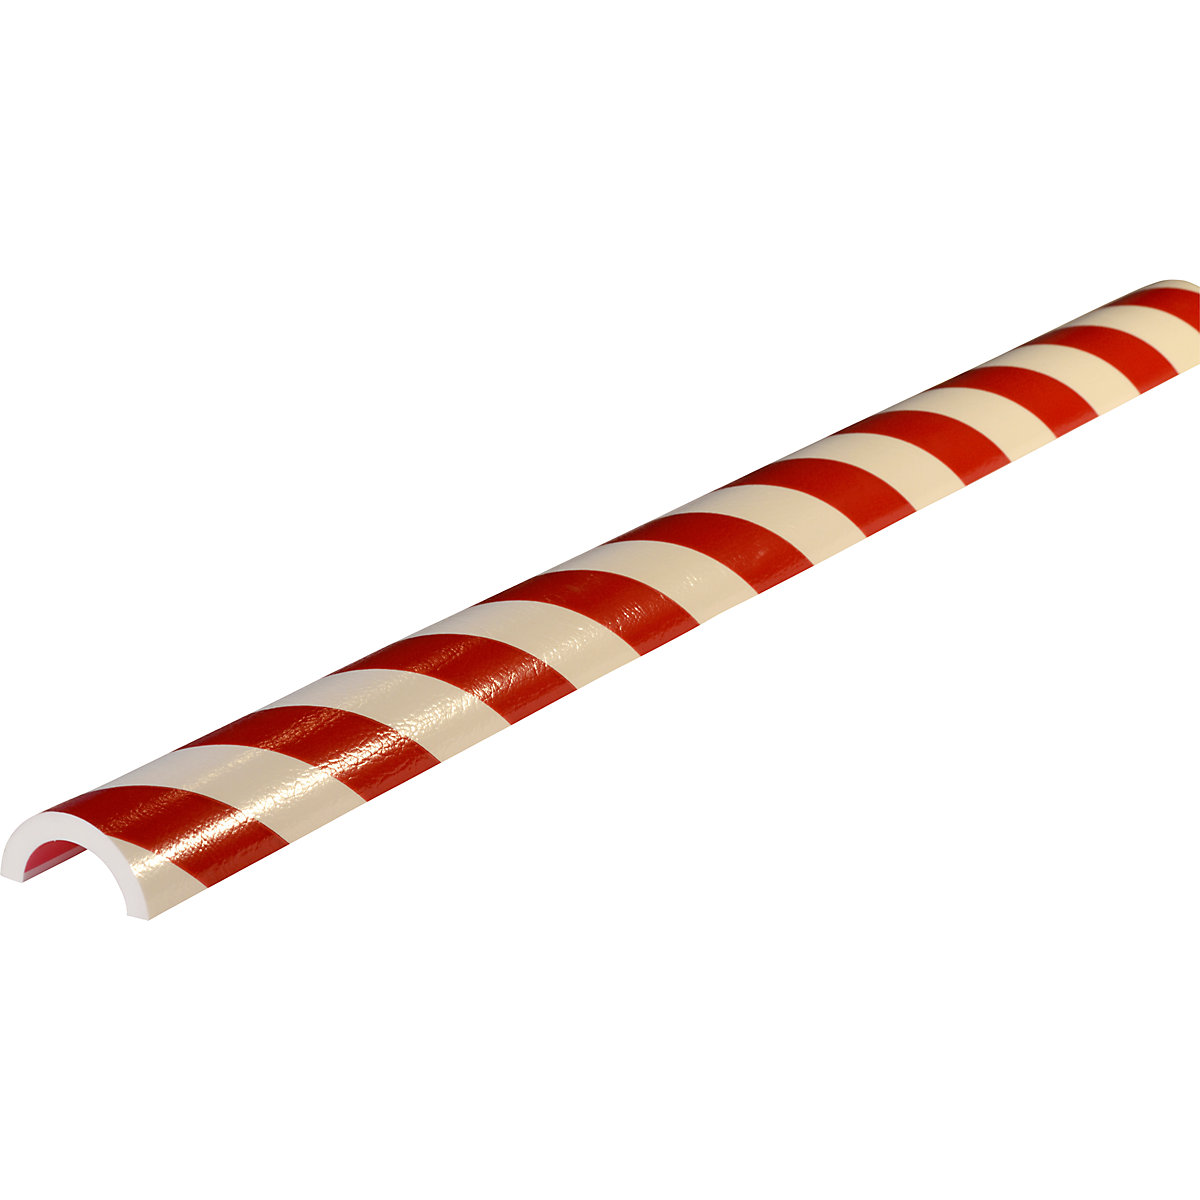 Knuffi® pipe protection – SHG, type R50, 1 m length, red / white-10